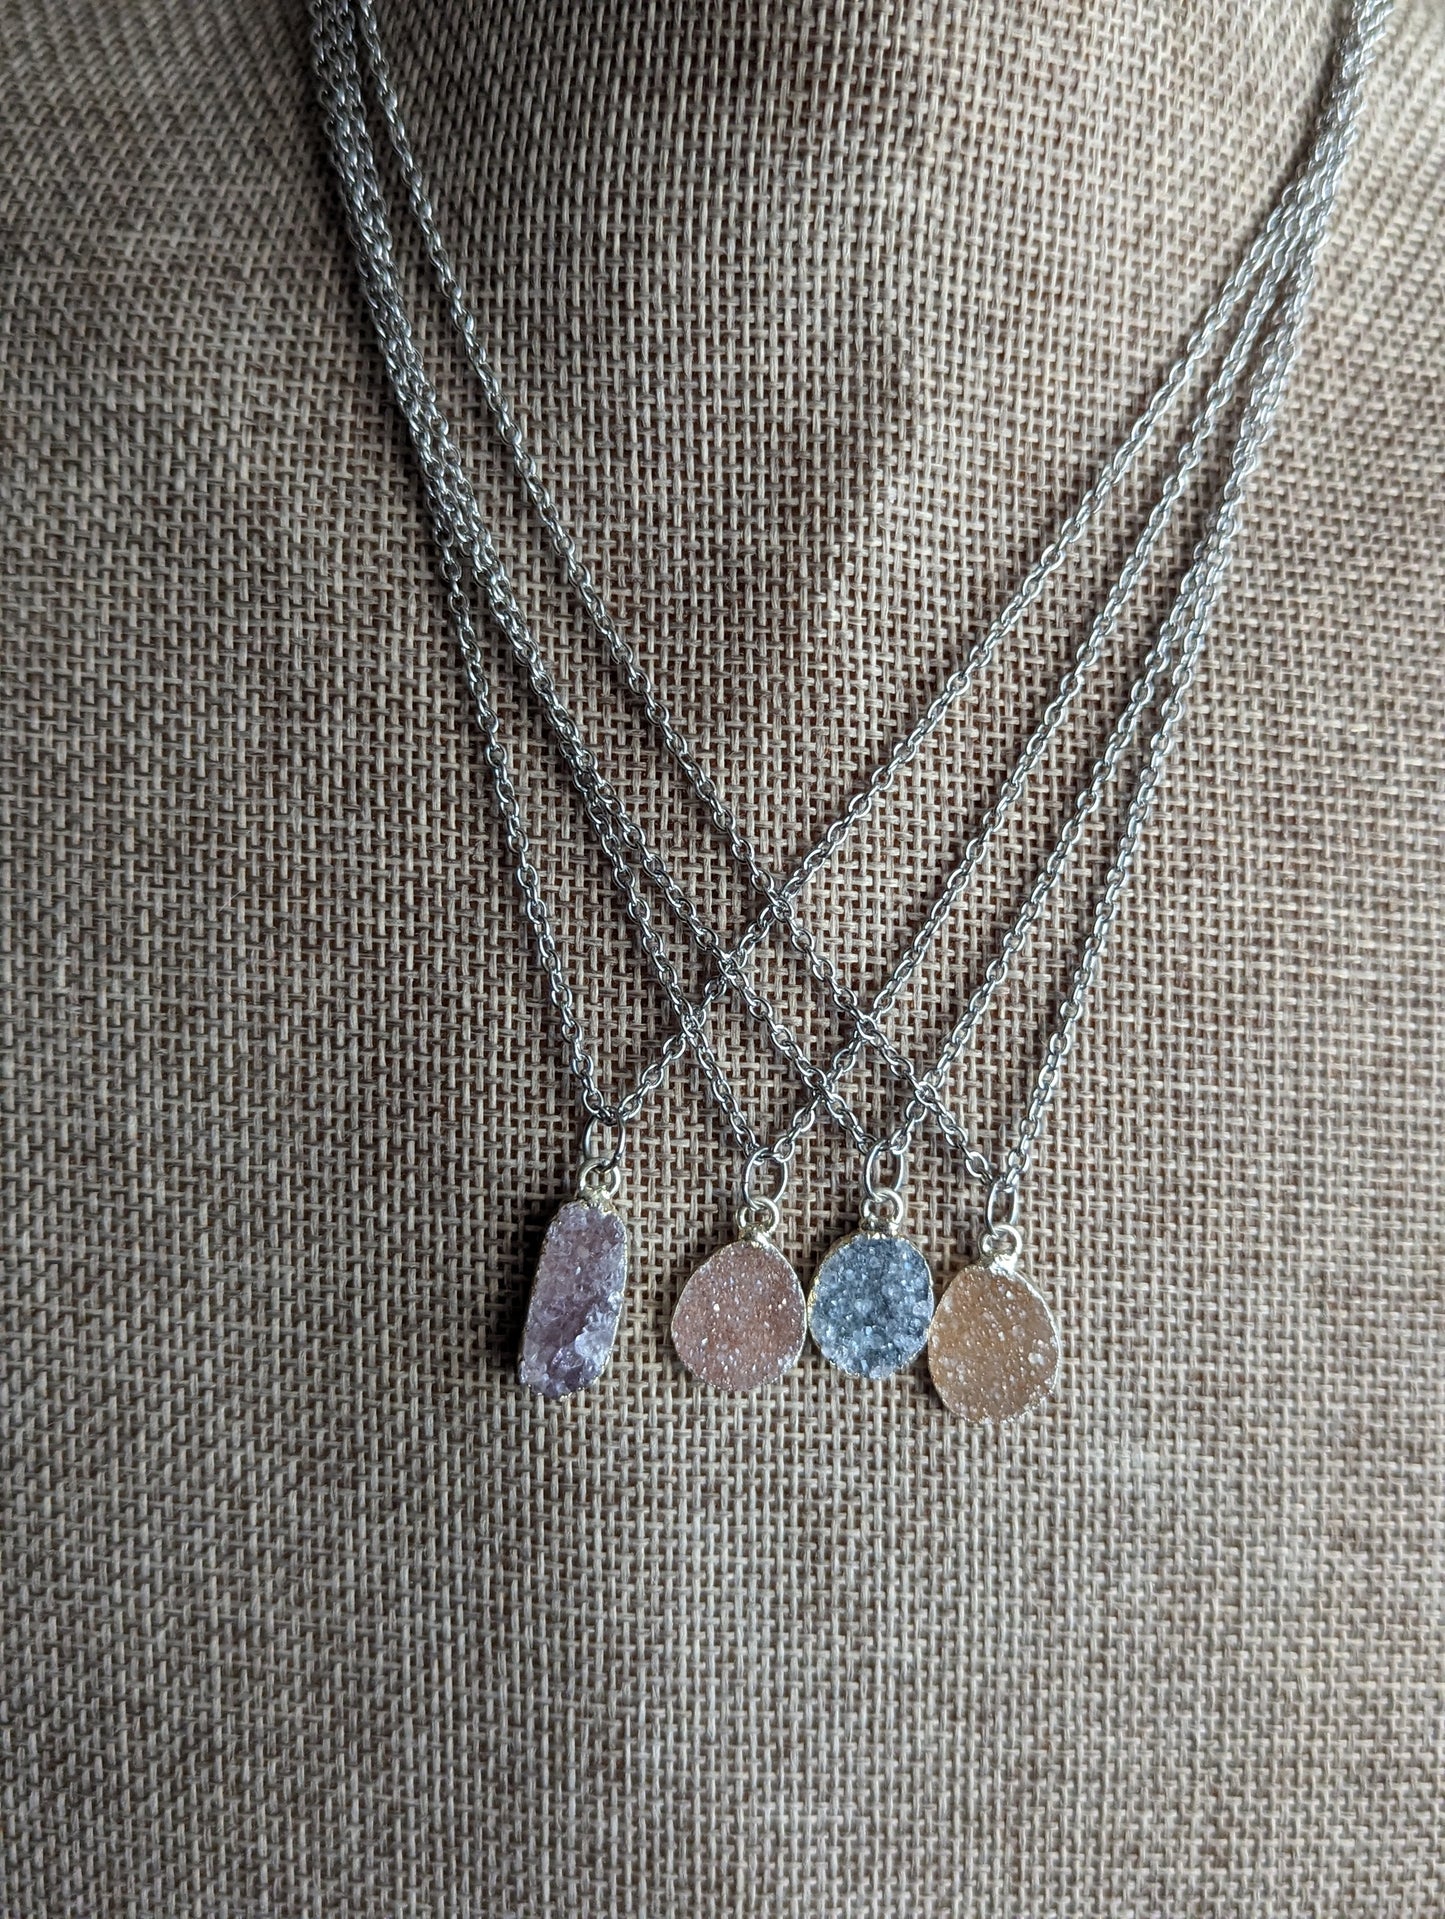 Druzy Pendants in Stainless Steel (Various Styles Available)